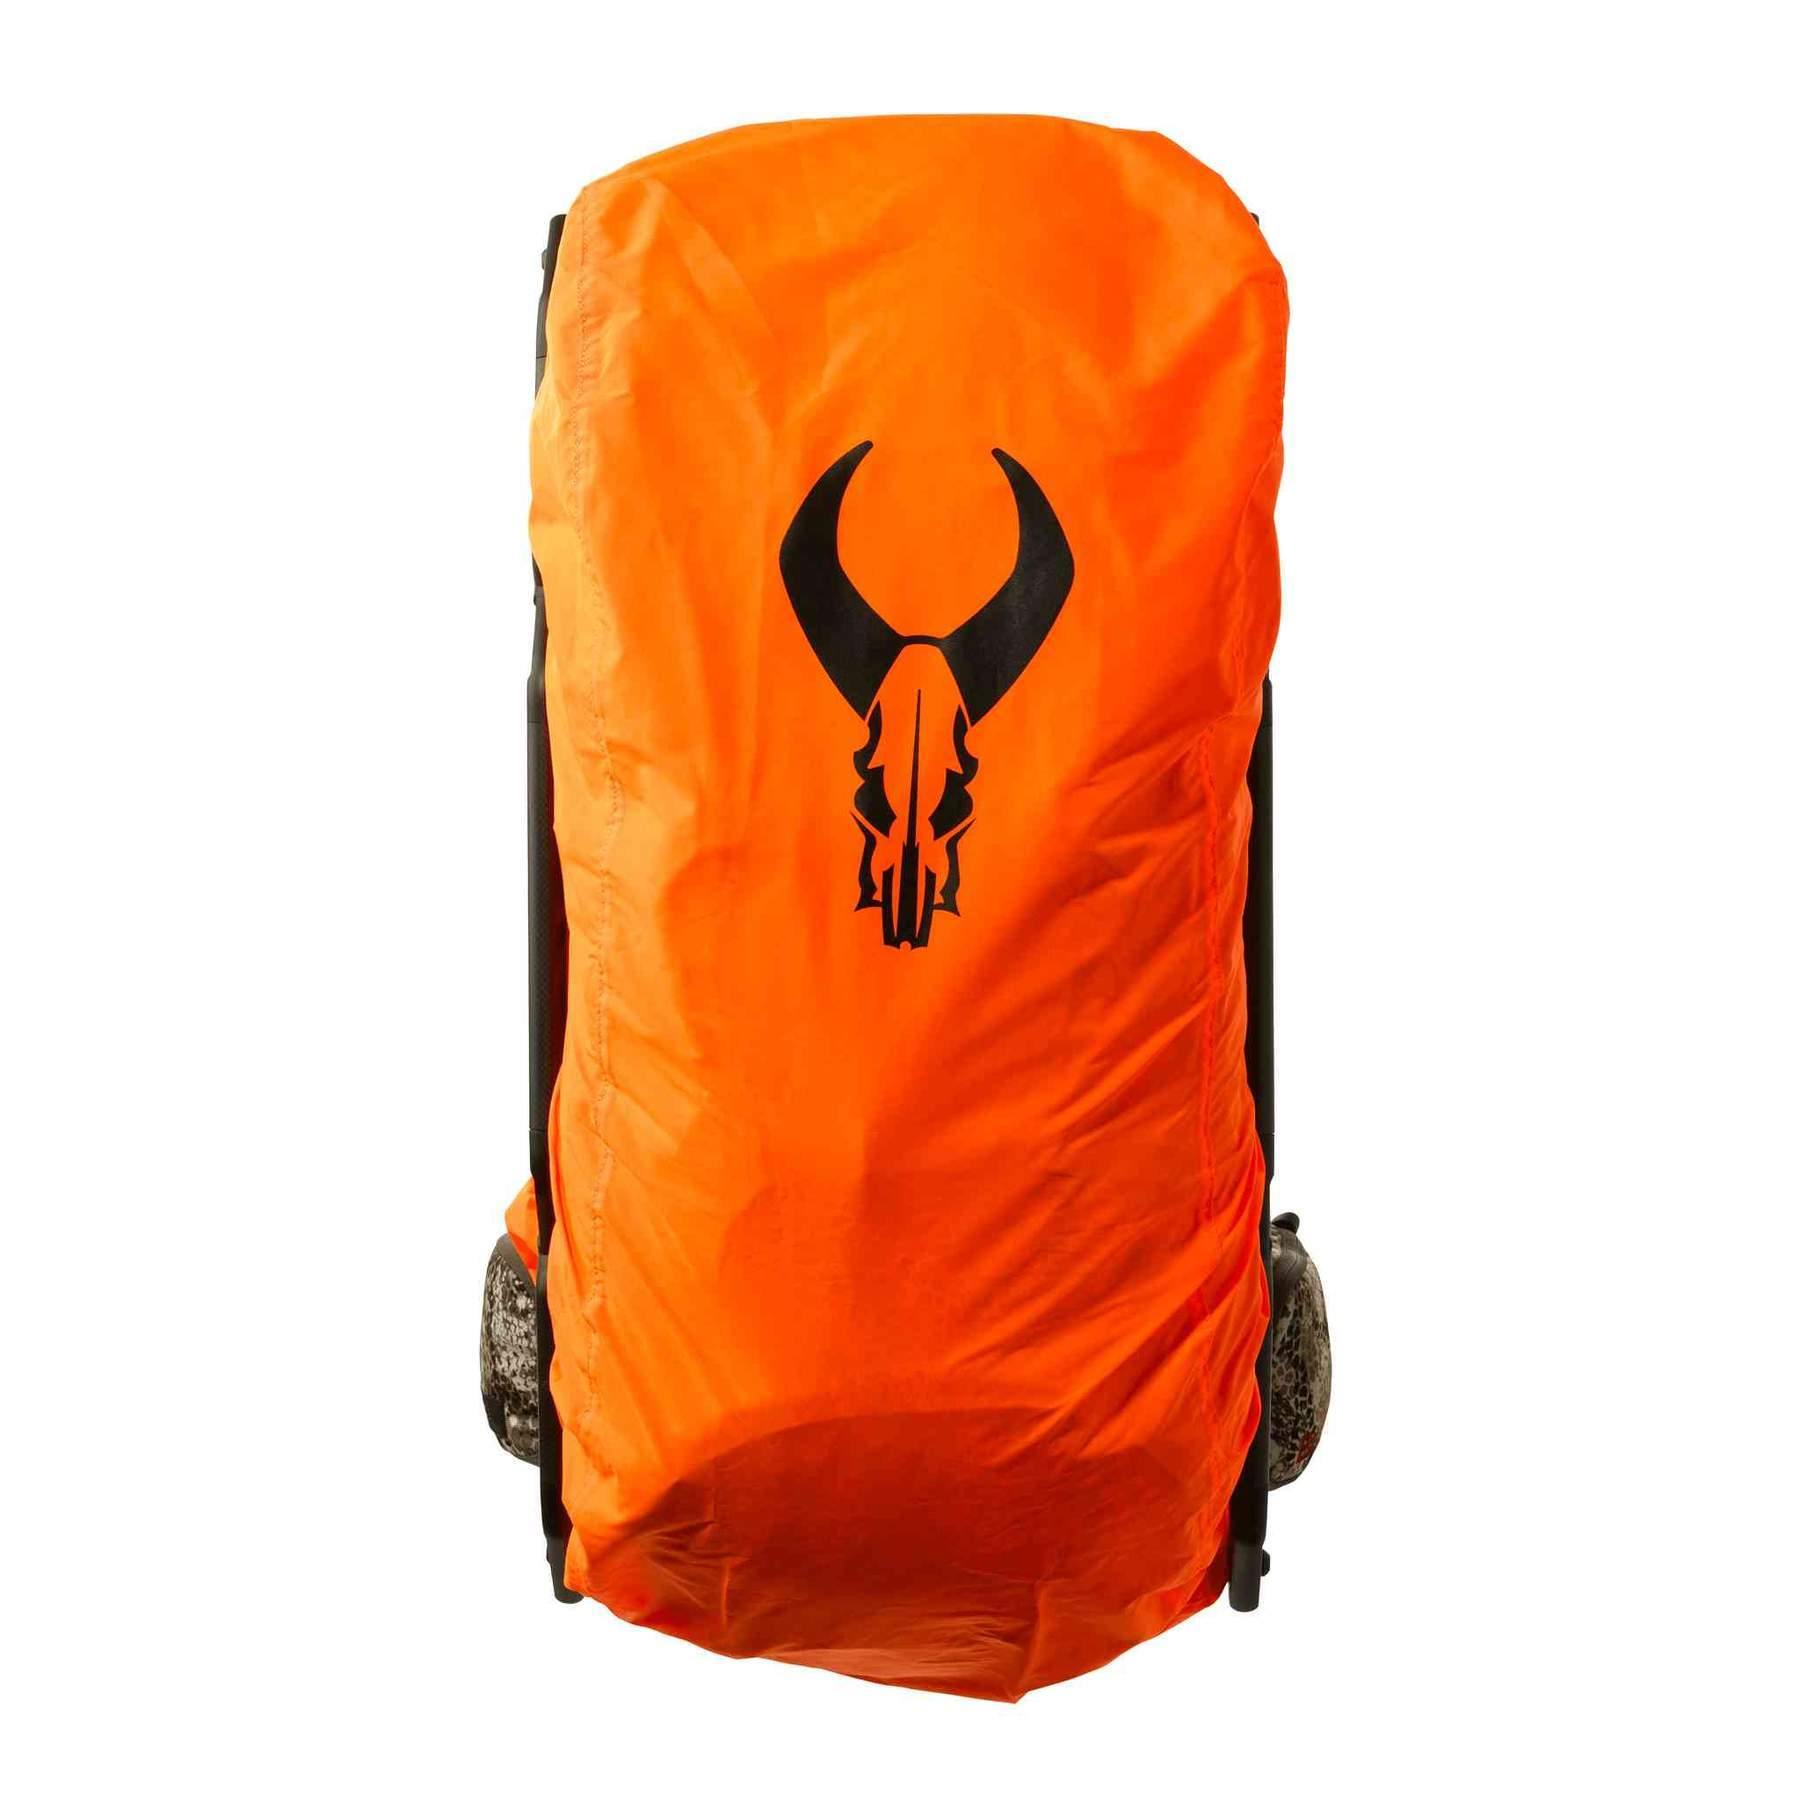 Badlands Rain Cover - Leapfrog Outdoor Sports and Apparel